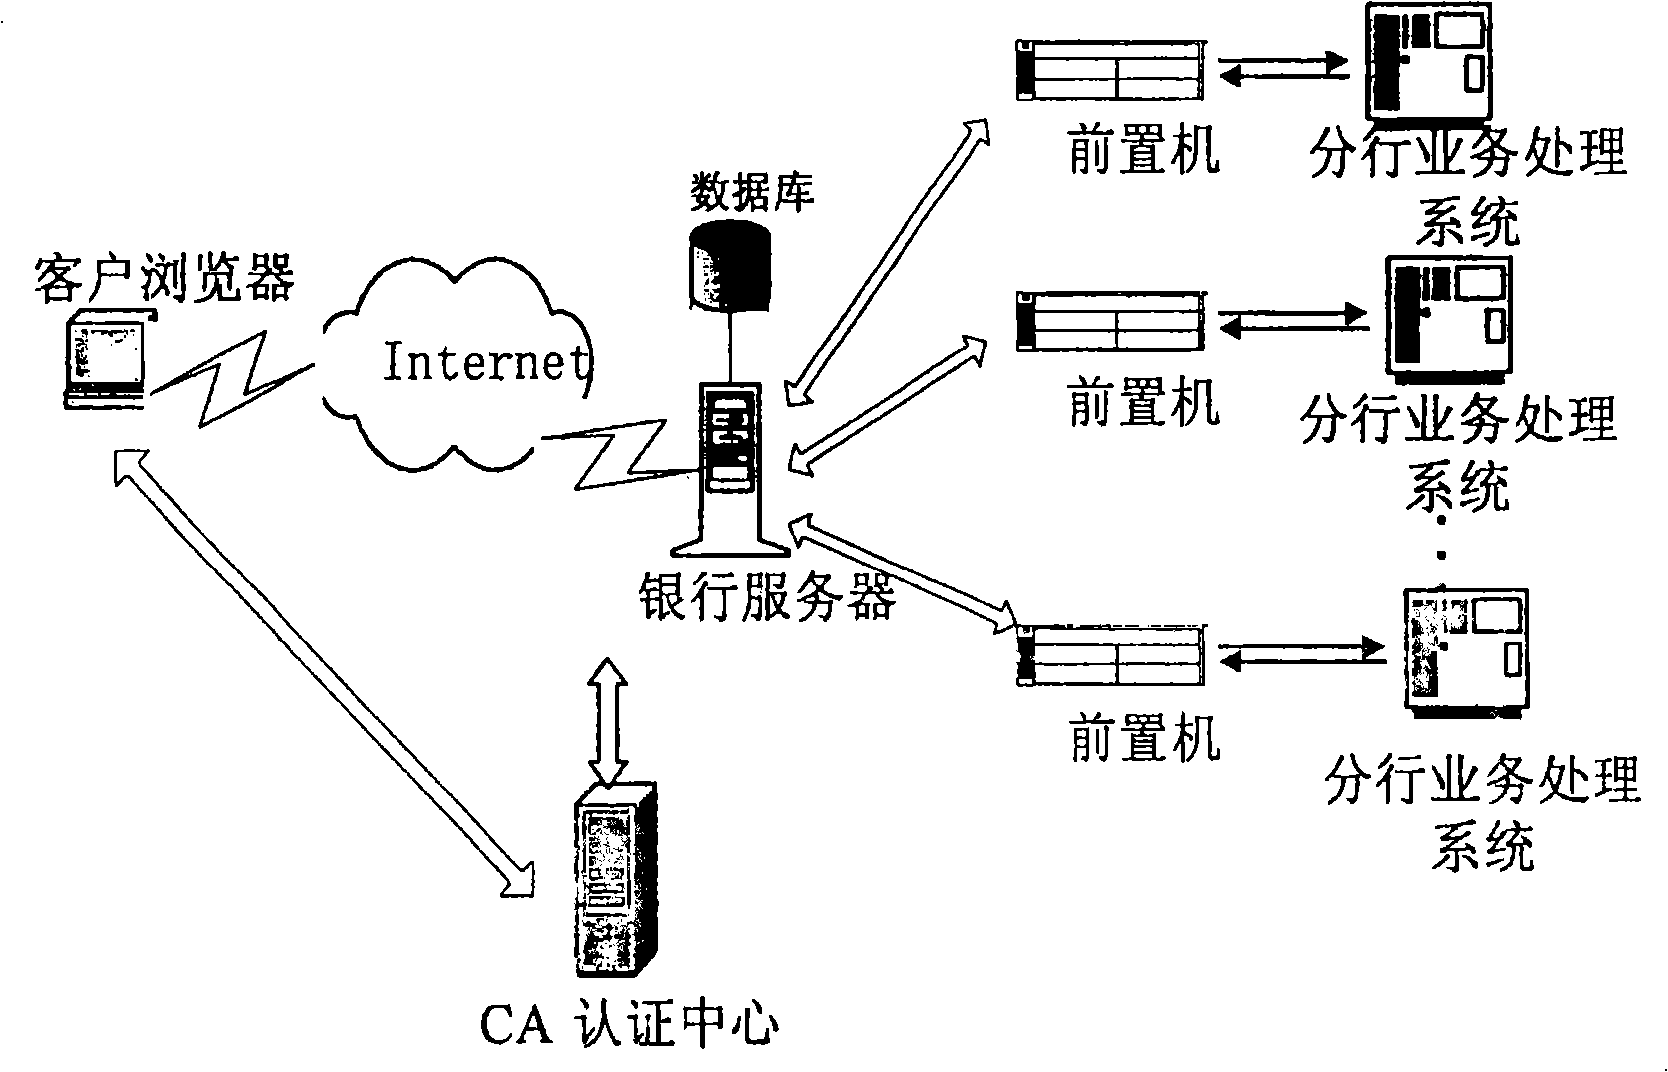 System and method for processing client protocol capital pool data based on network